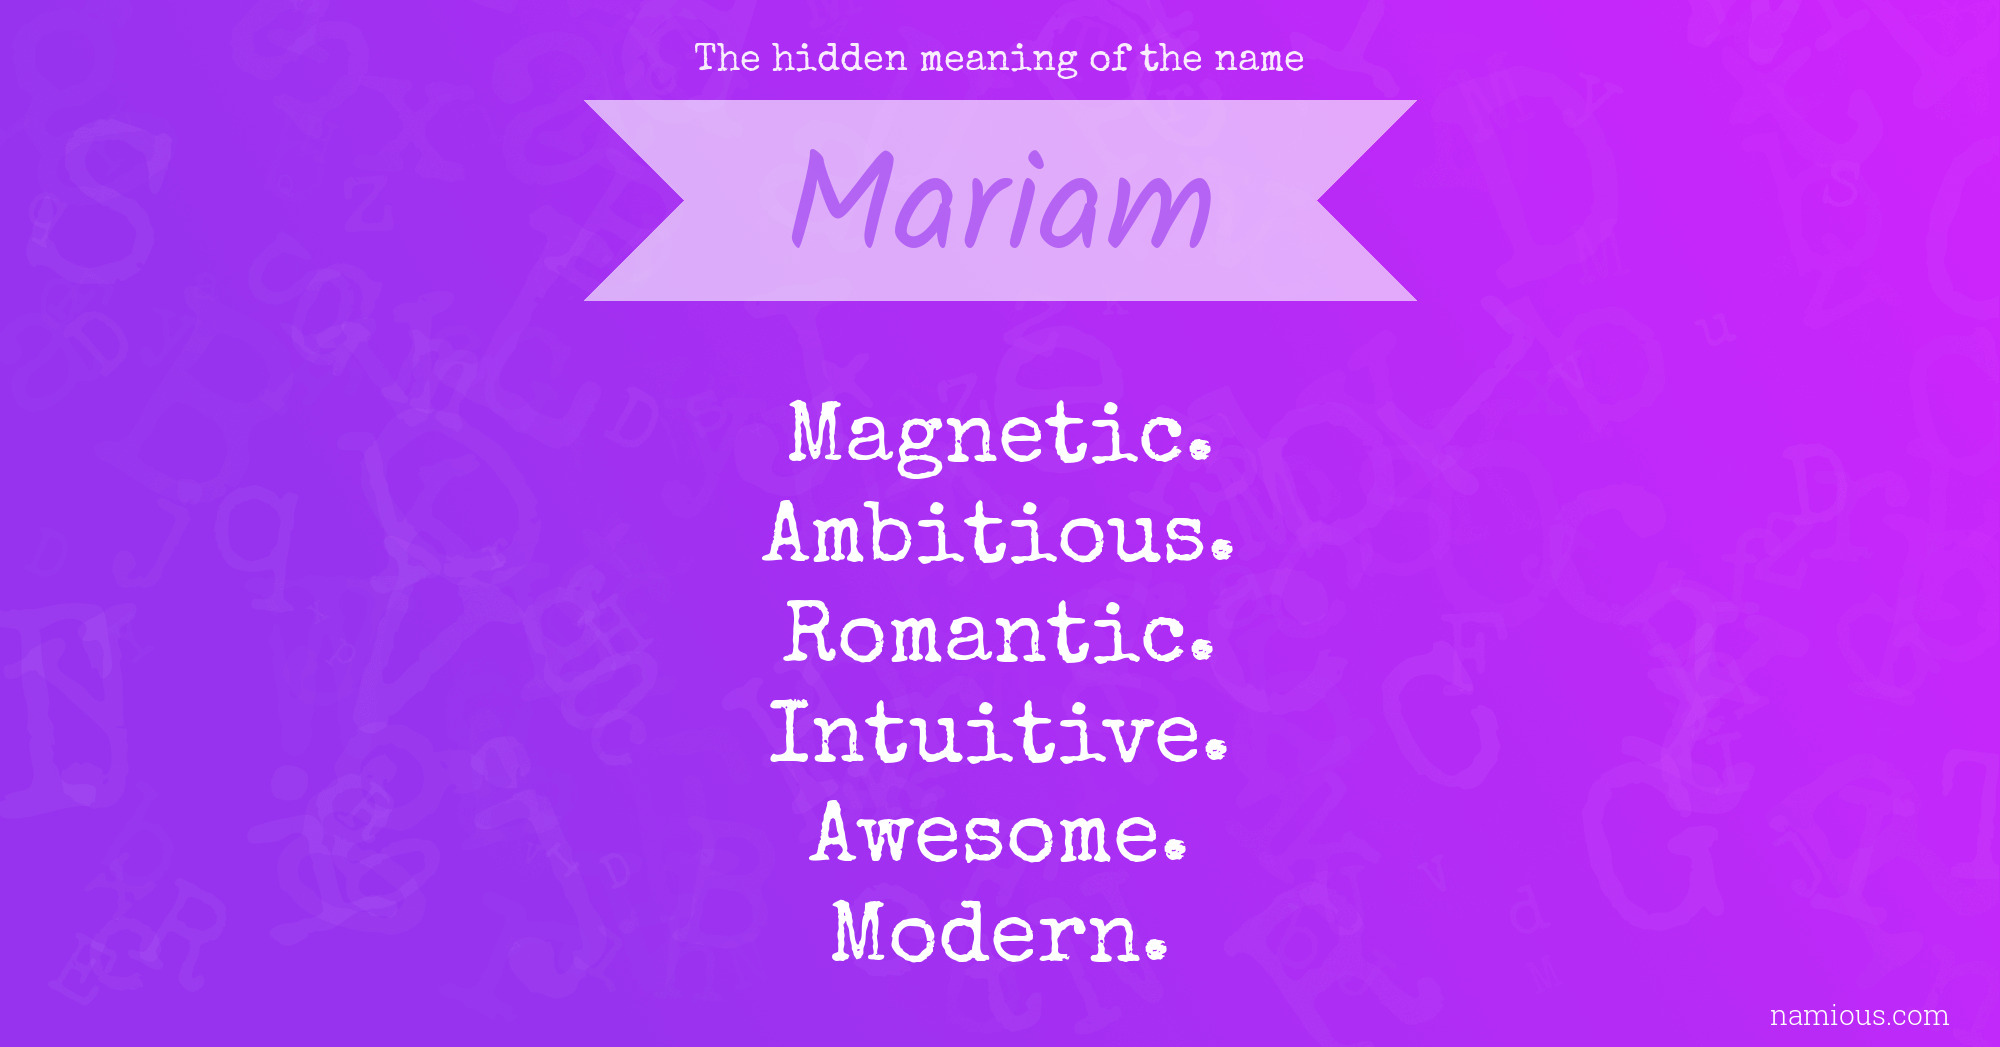 The hidden meaning of the name Mariam